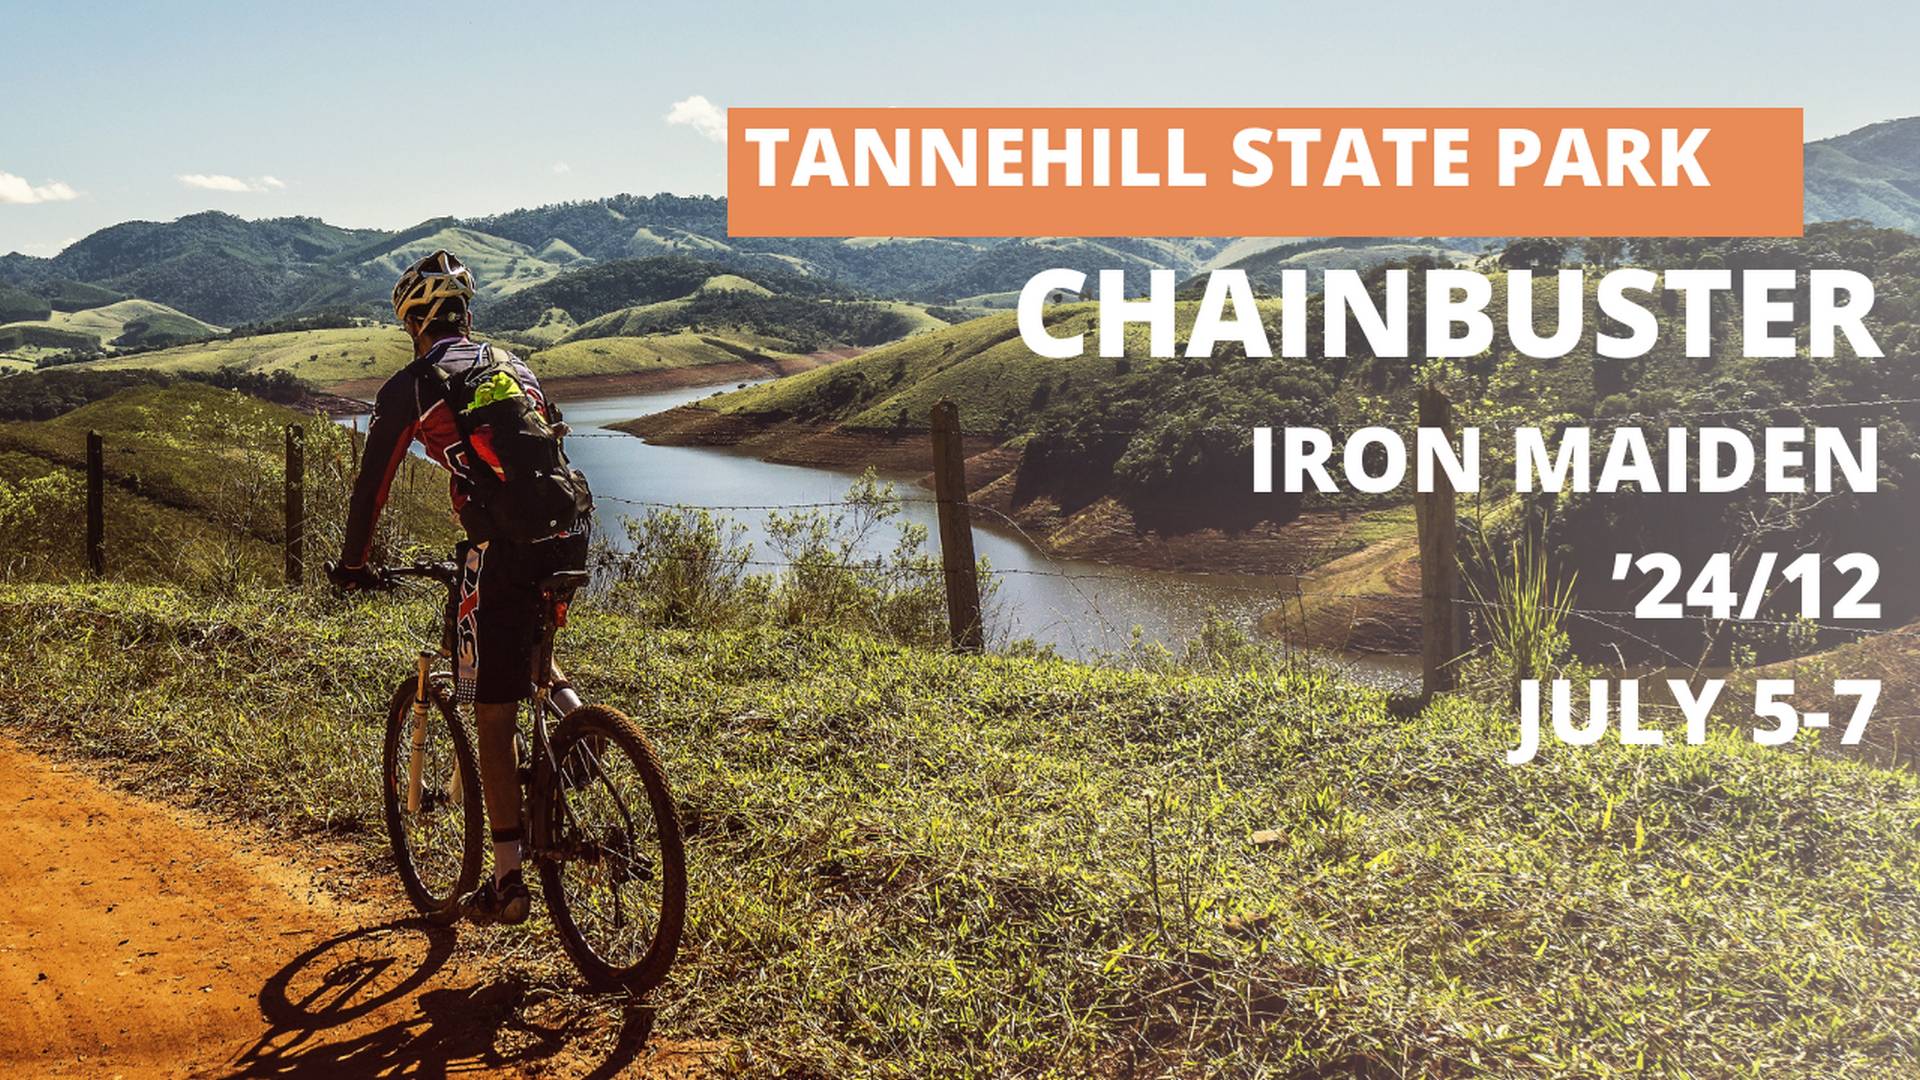 Chainbuster Iron Maiden 2024 at Tannehill State Park